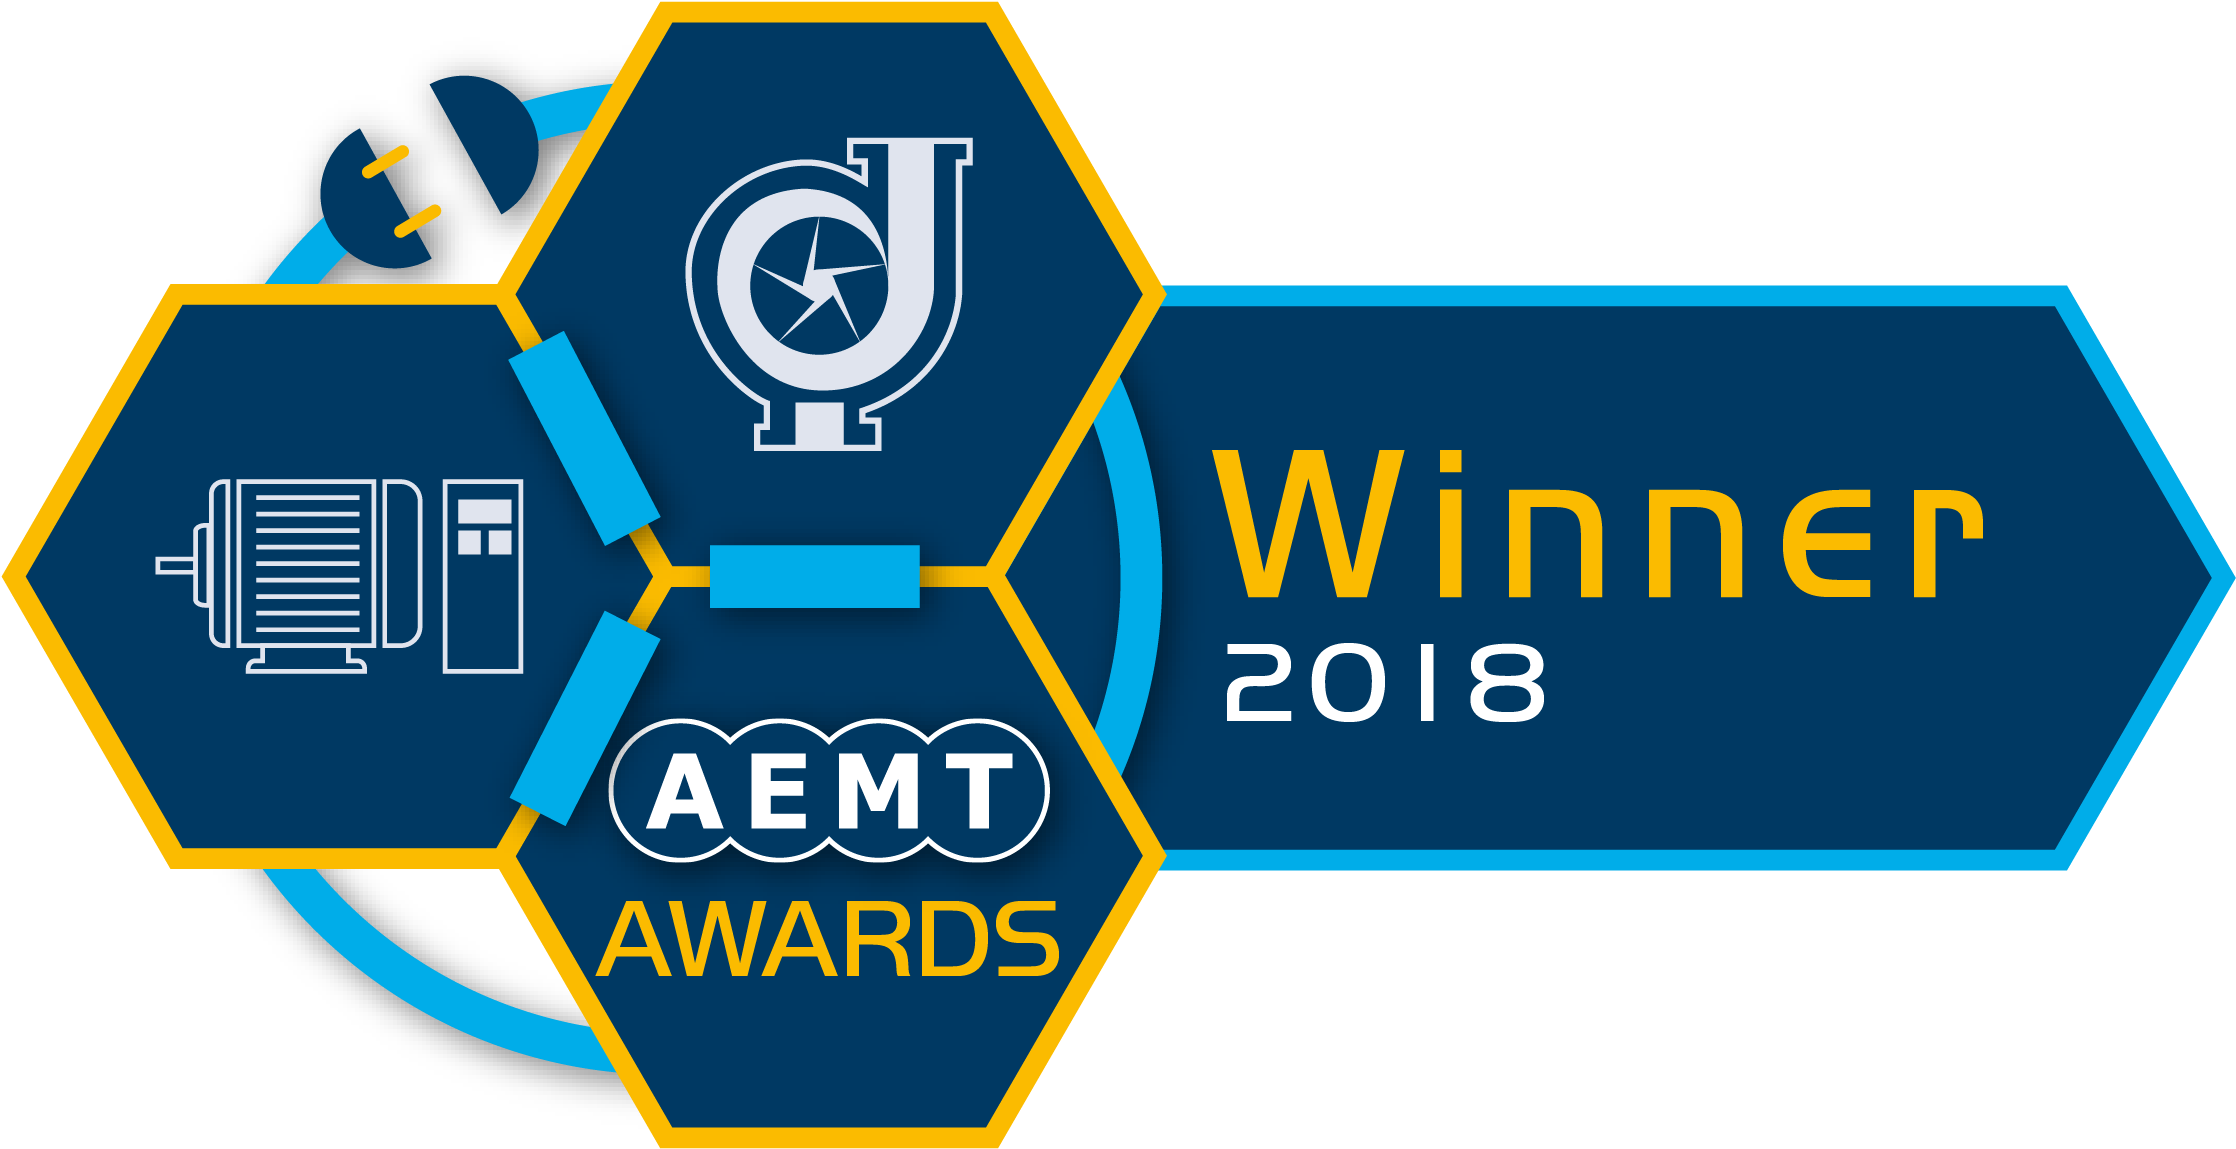 2018 Aemt Awards Winners Announced - Technical Image Press Association (2500x1292), Png Download